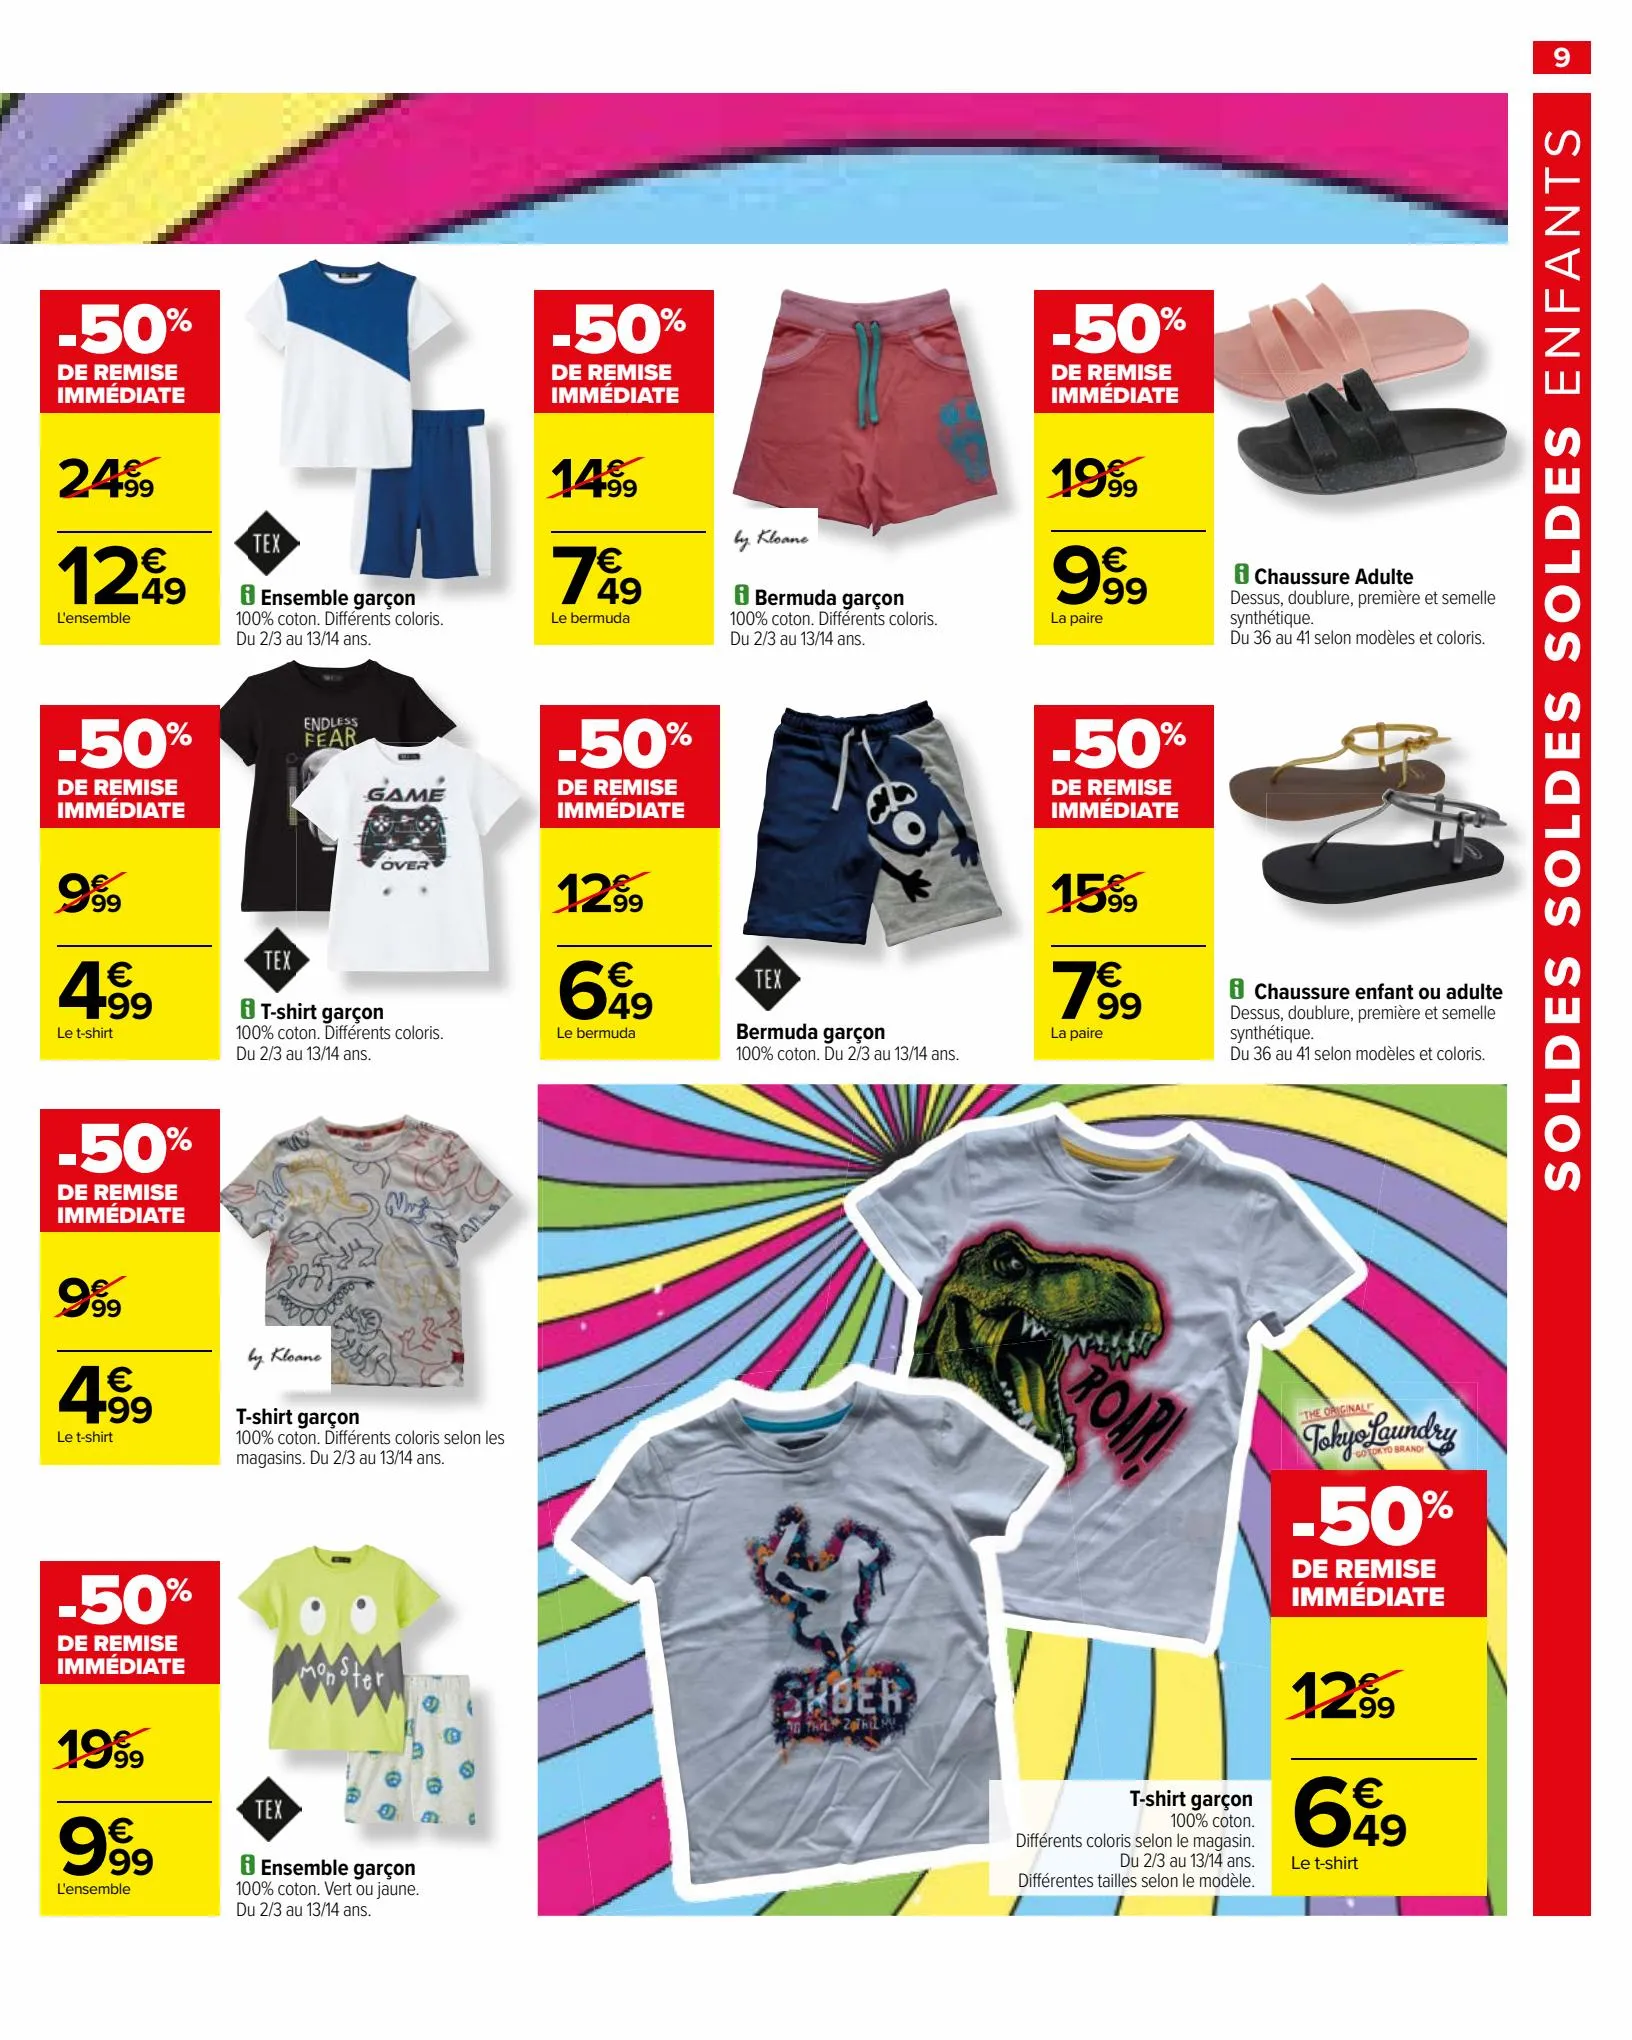 Catalogue SOLDES, page 00009